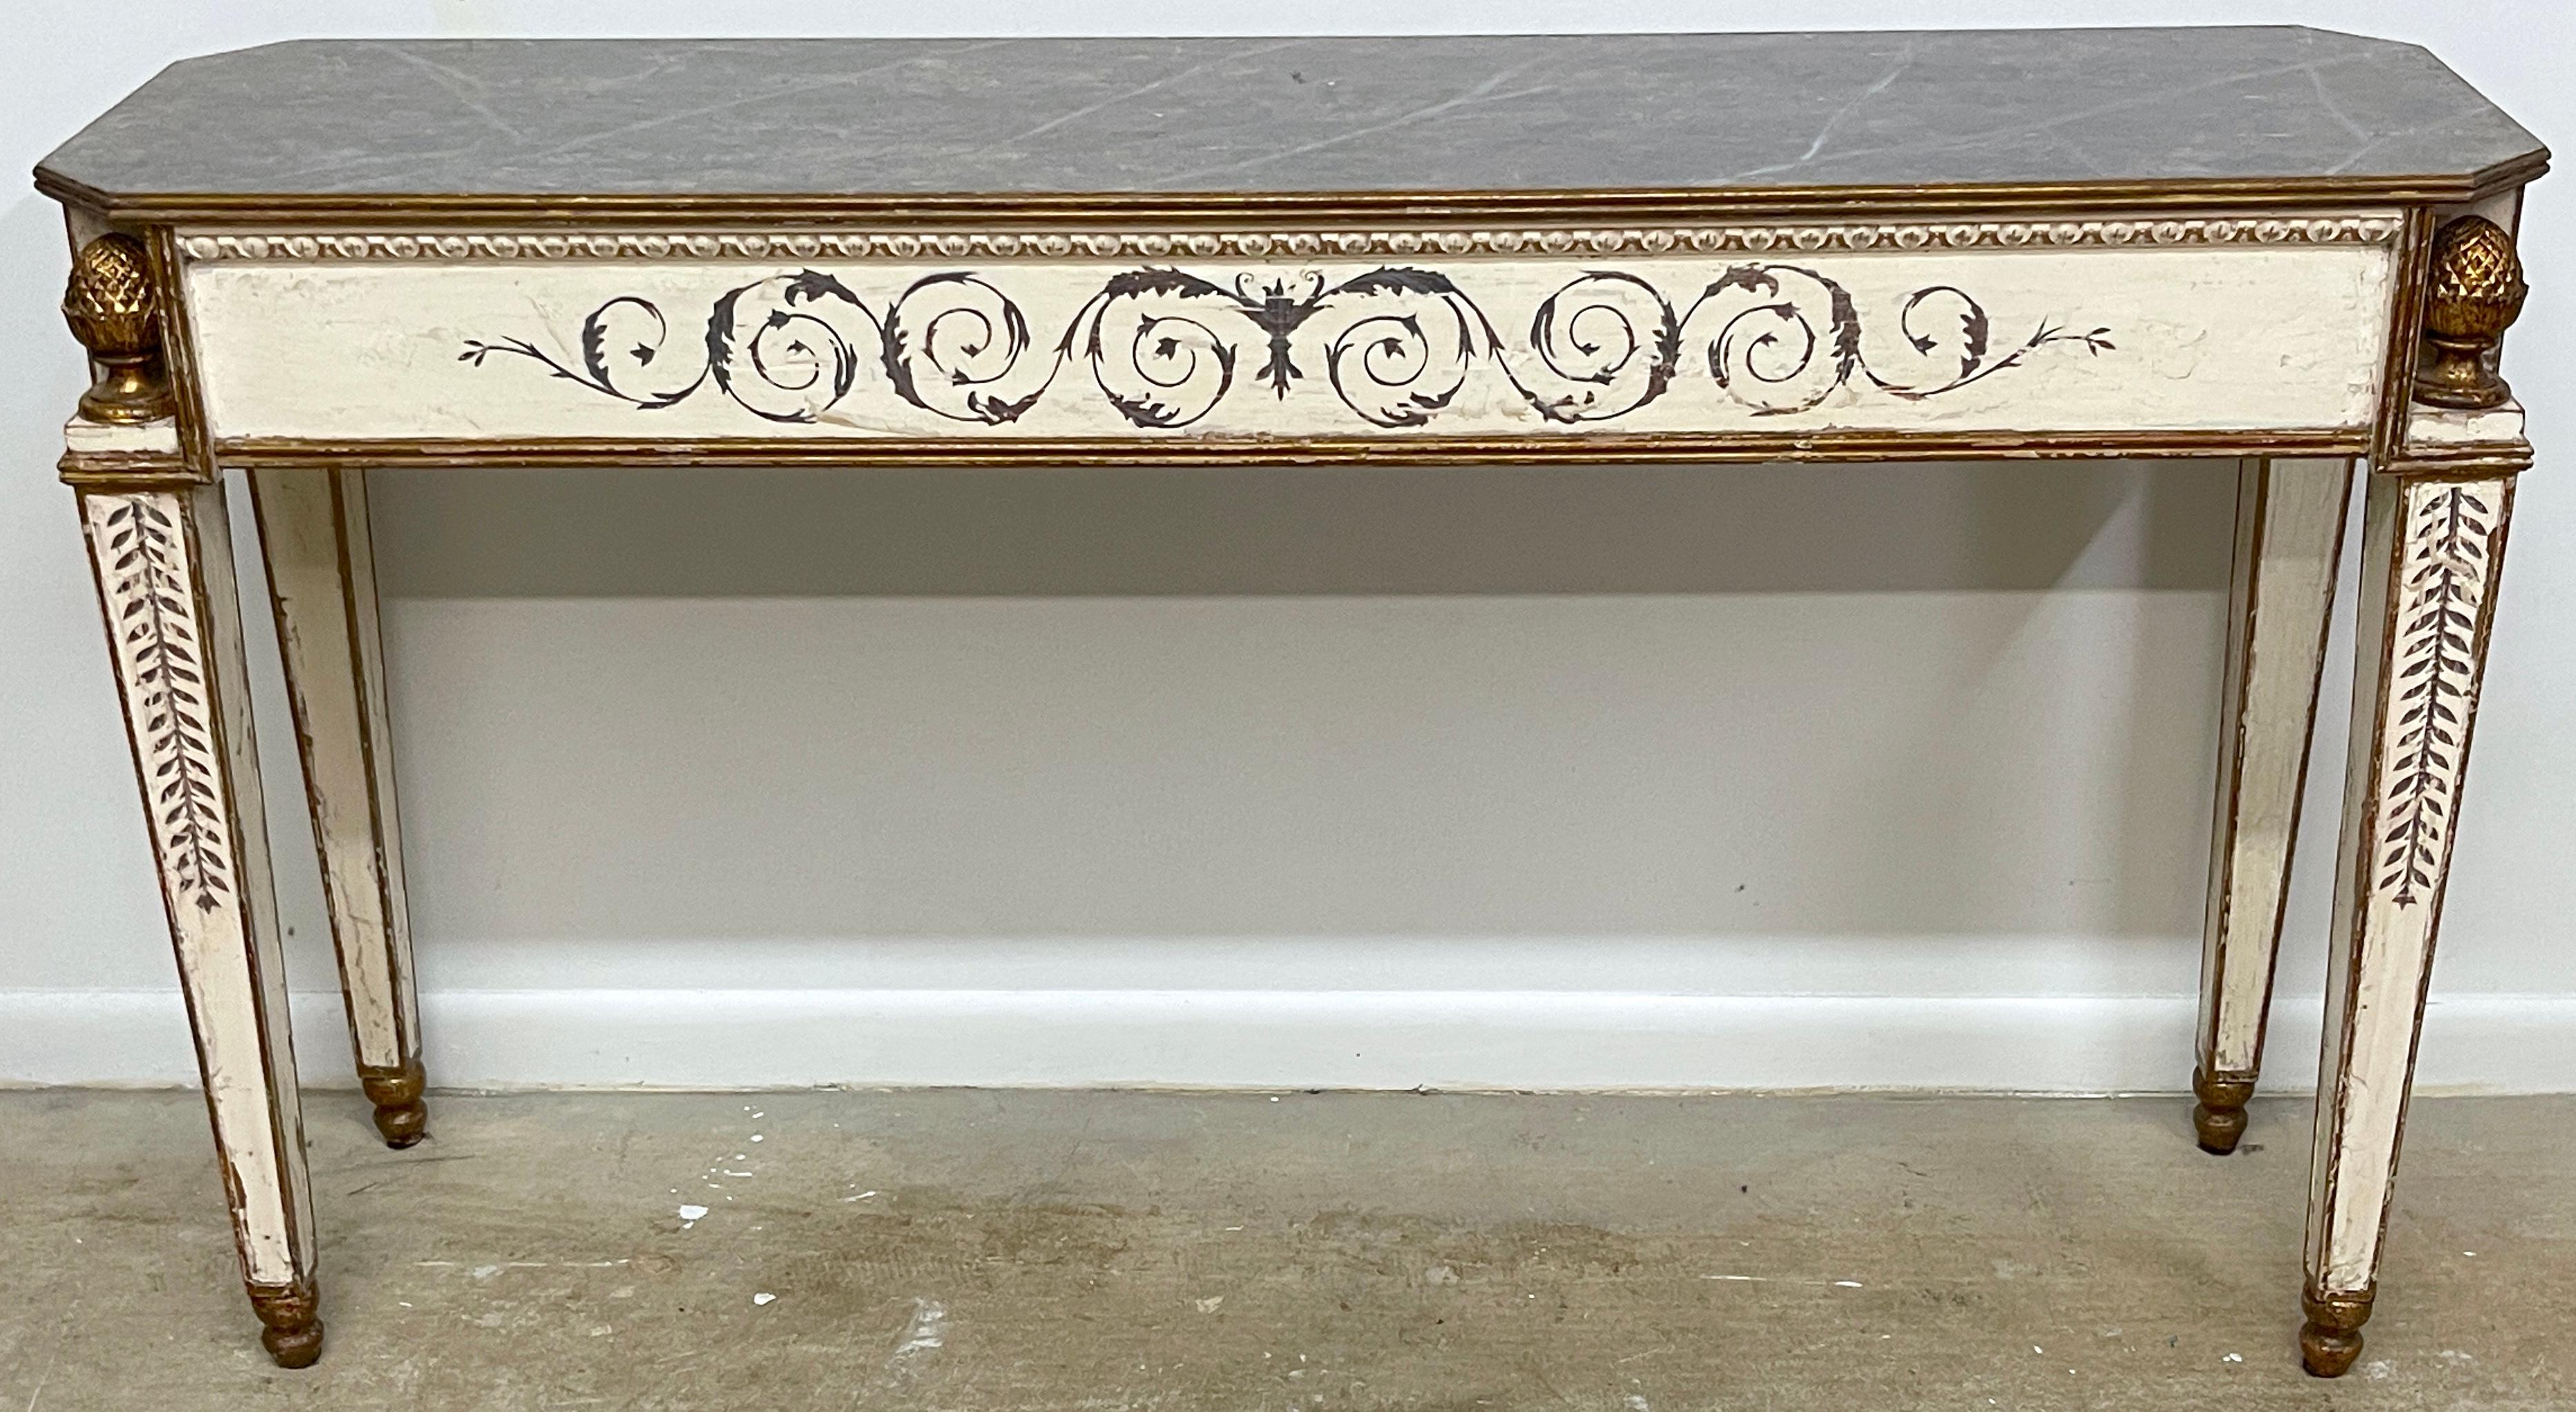 Fine Italian Painted and Gilt Neoclassical Console Table 
Italy, 20th century 

A fine Italian Painted and Gilt Neoclassical Console Table, a stunning piece from the 20th century. This exquisite table is a testament to Italian craftsmanship and